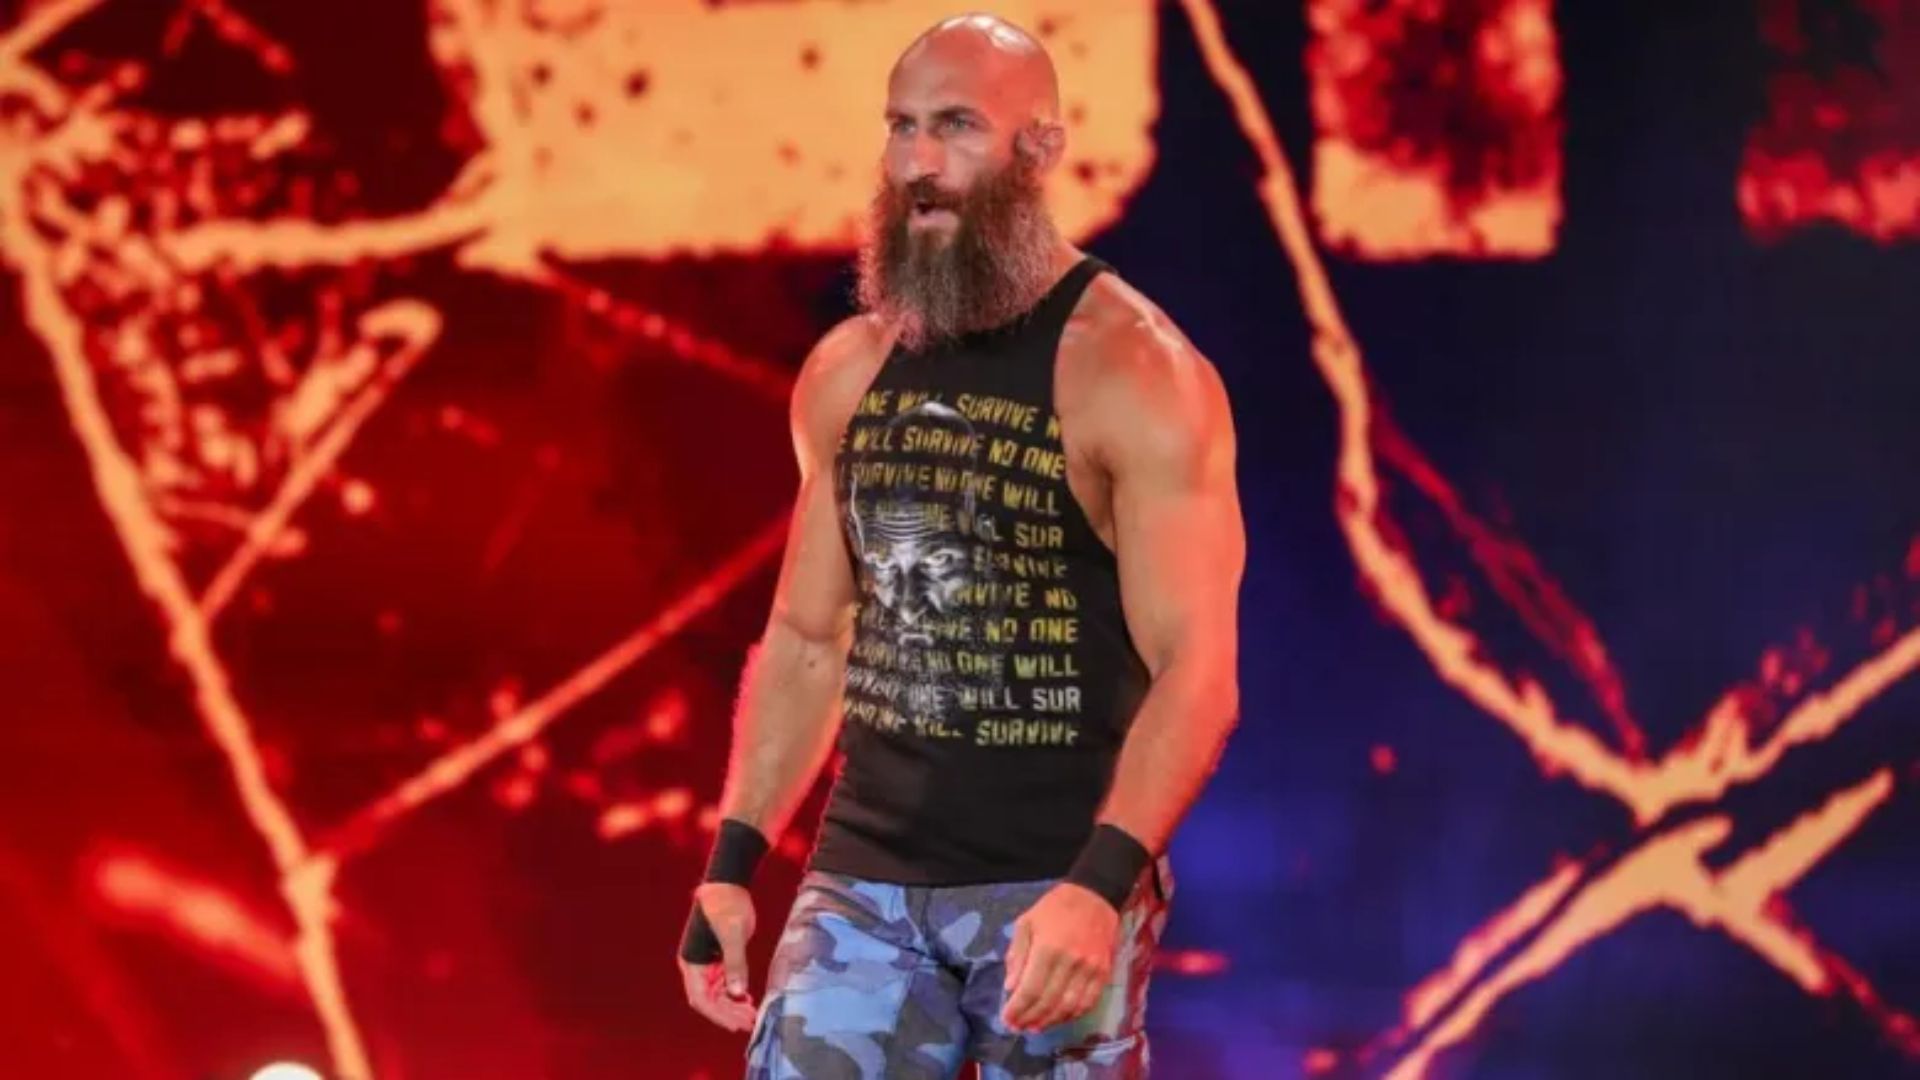 &quot;Blackheart&quot; Tomasso Ciampa was a mainstay during the former &quot;black and gold era&quot; of NXT